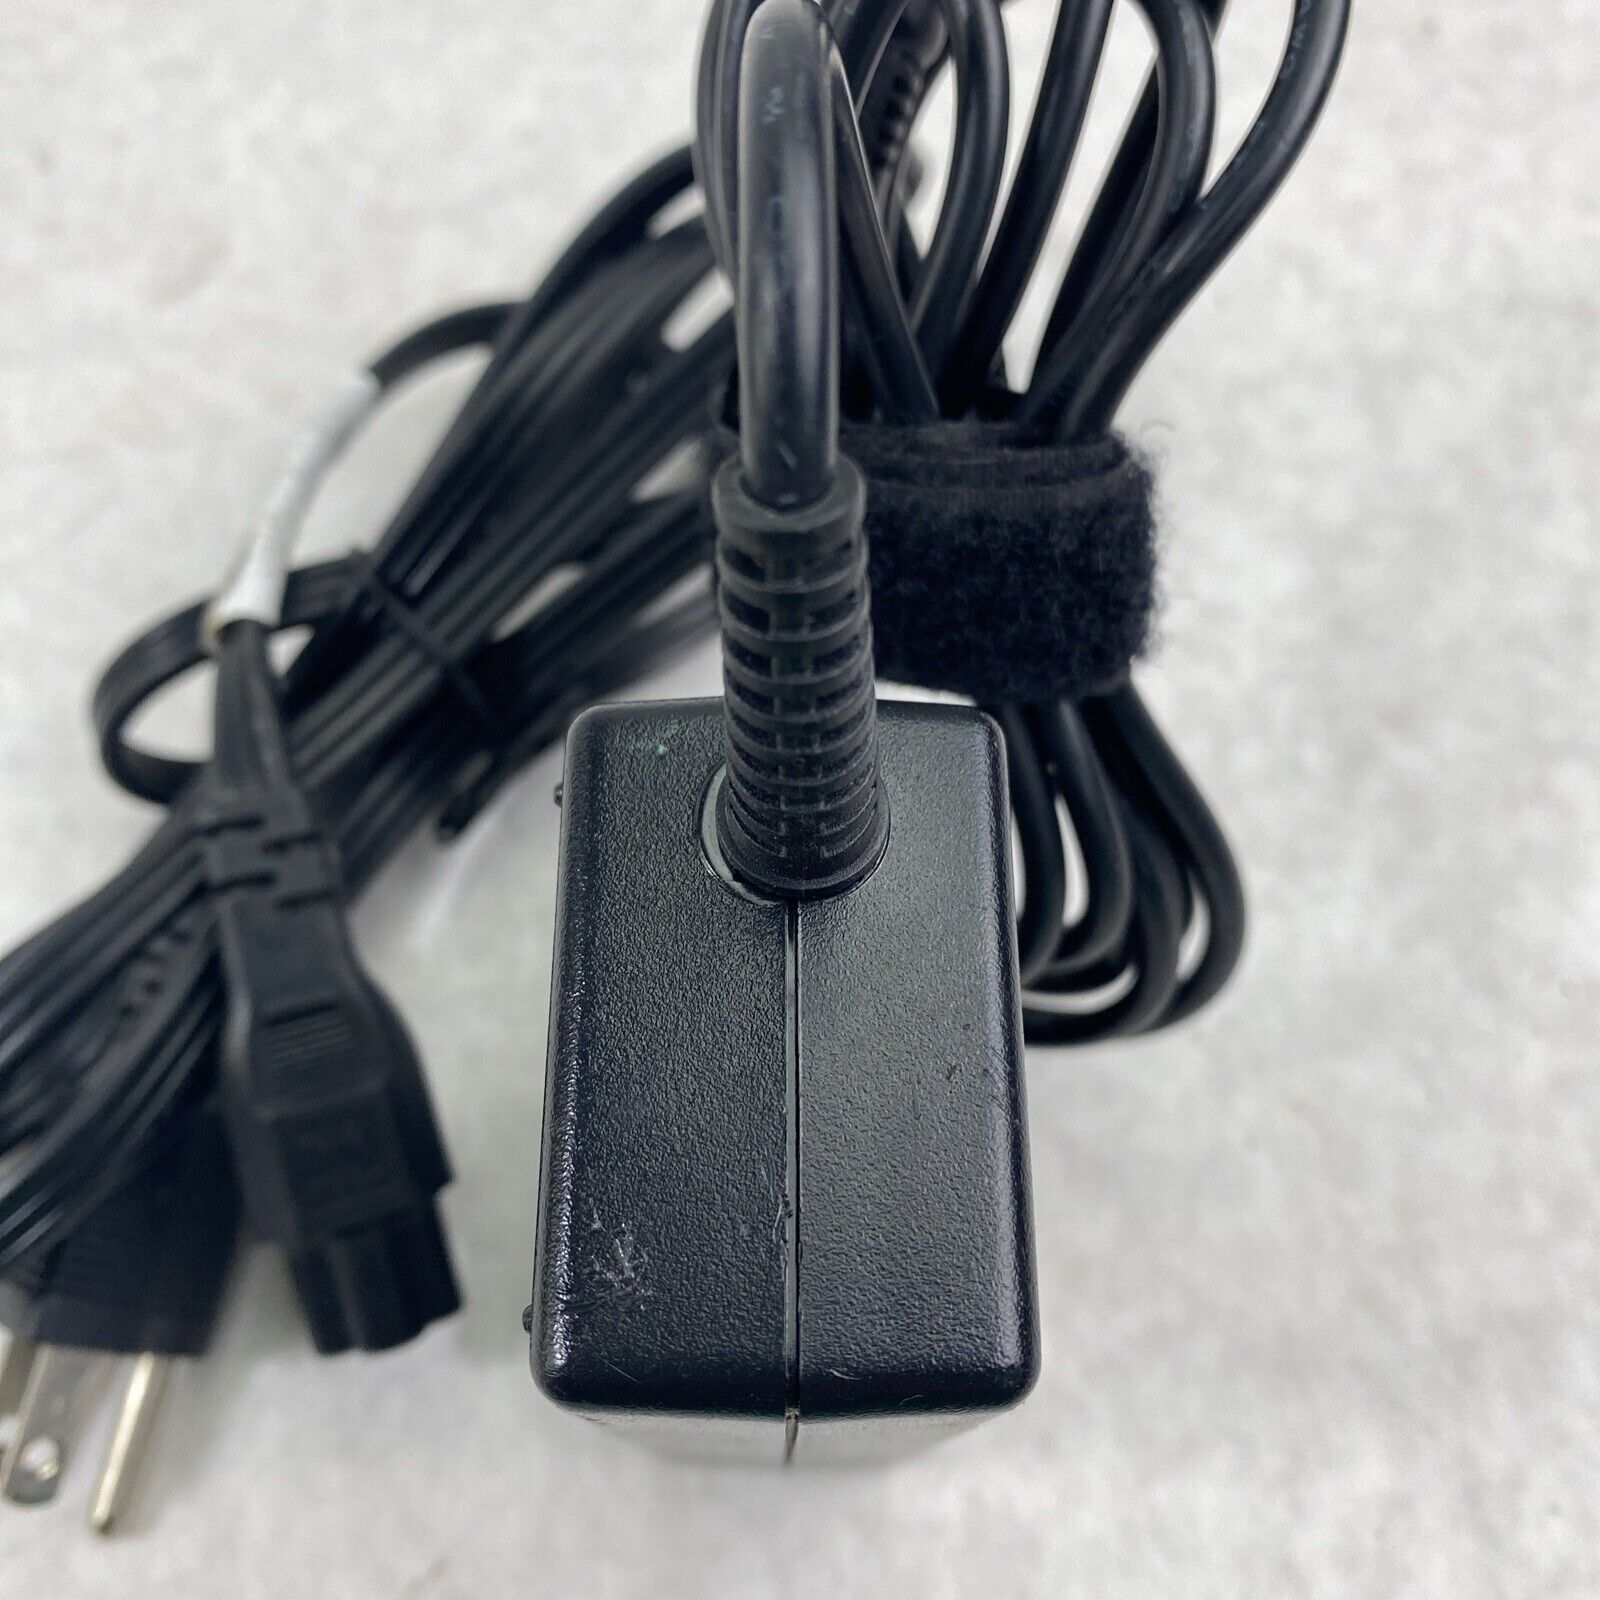 genuine HP 463552-004 laptop charger AC power adapter 463958-001 18.5V 3.5A 65W